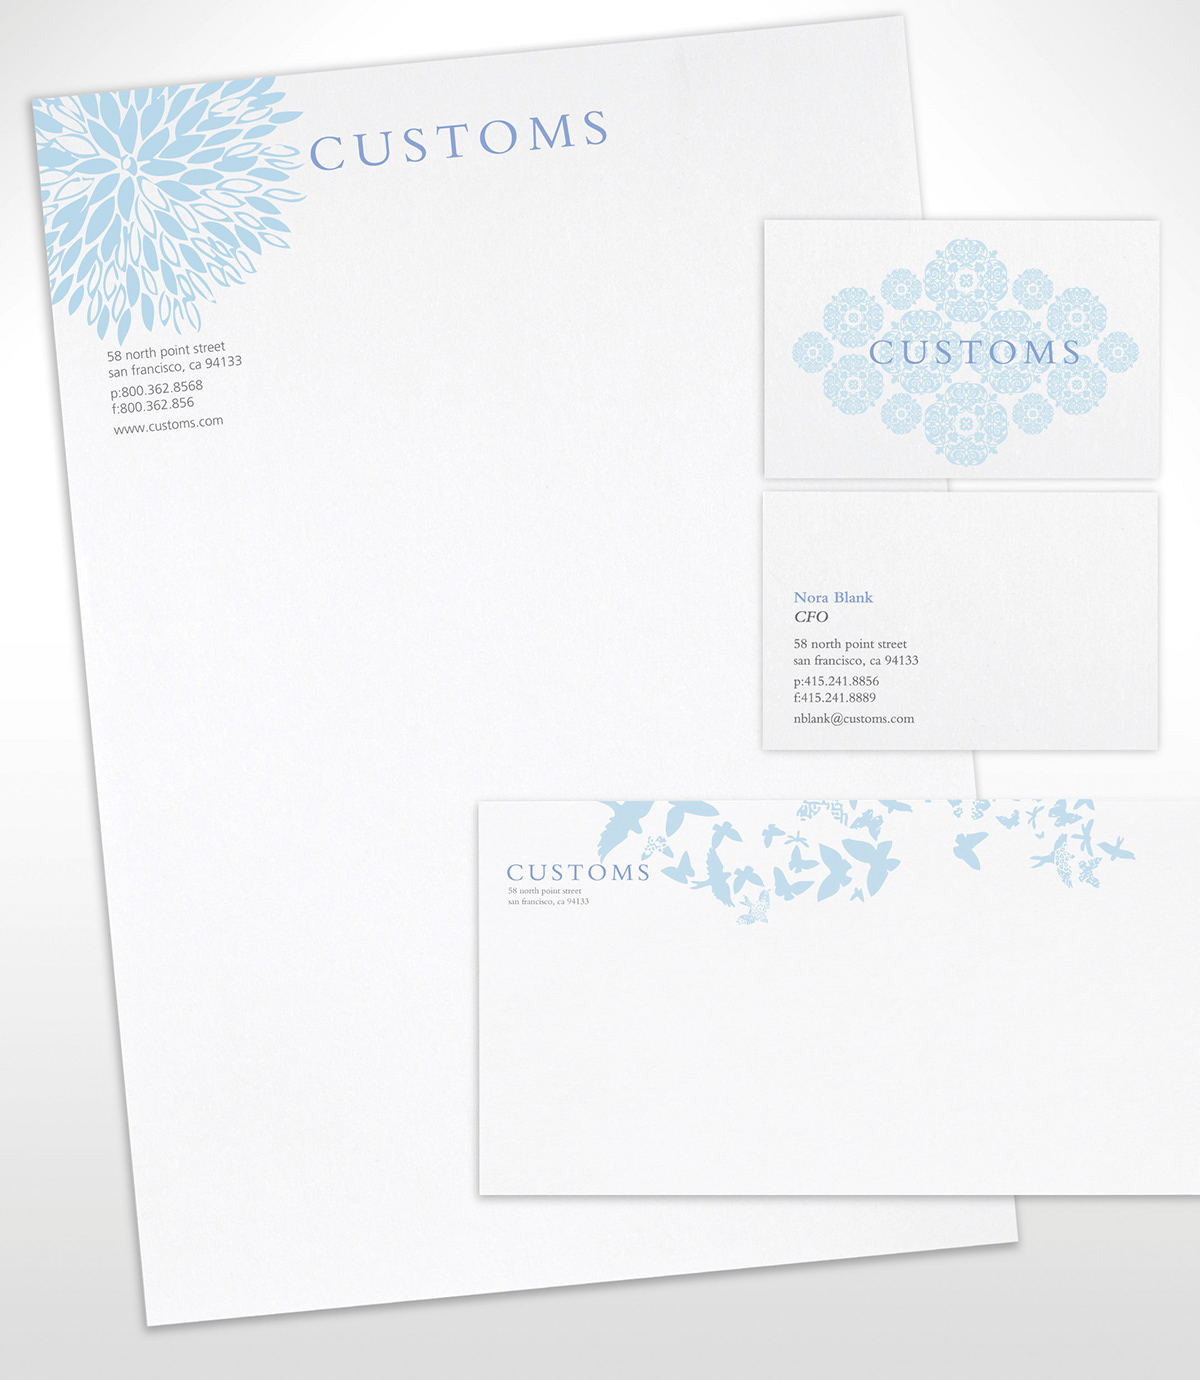 logo letterhead business card catalog wedding invitations posters Layout flyers